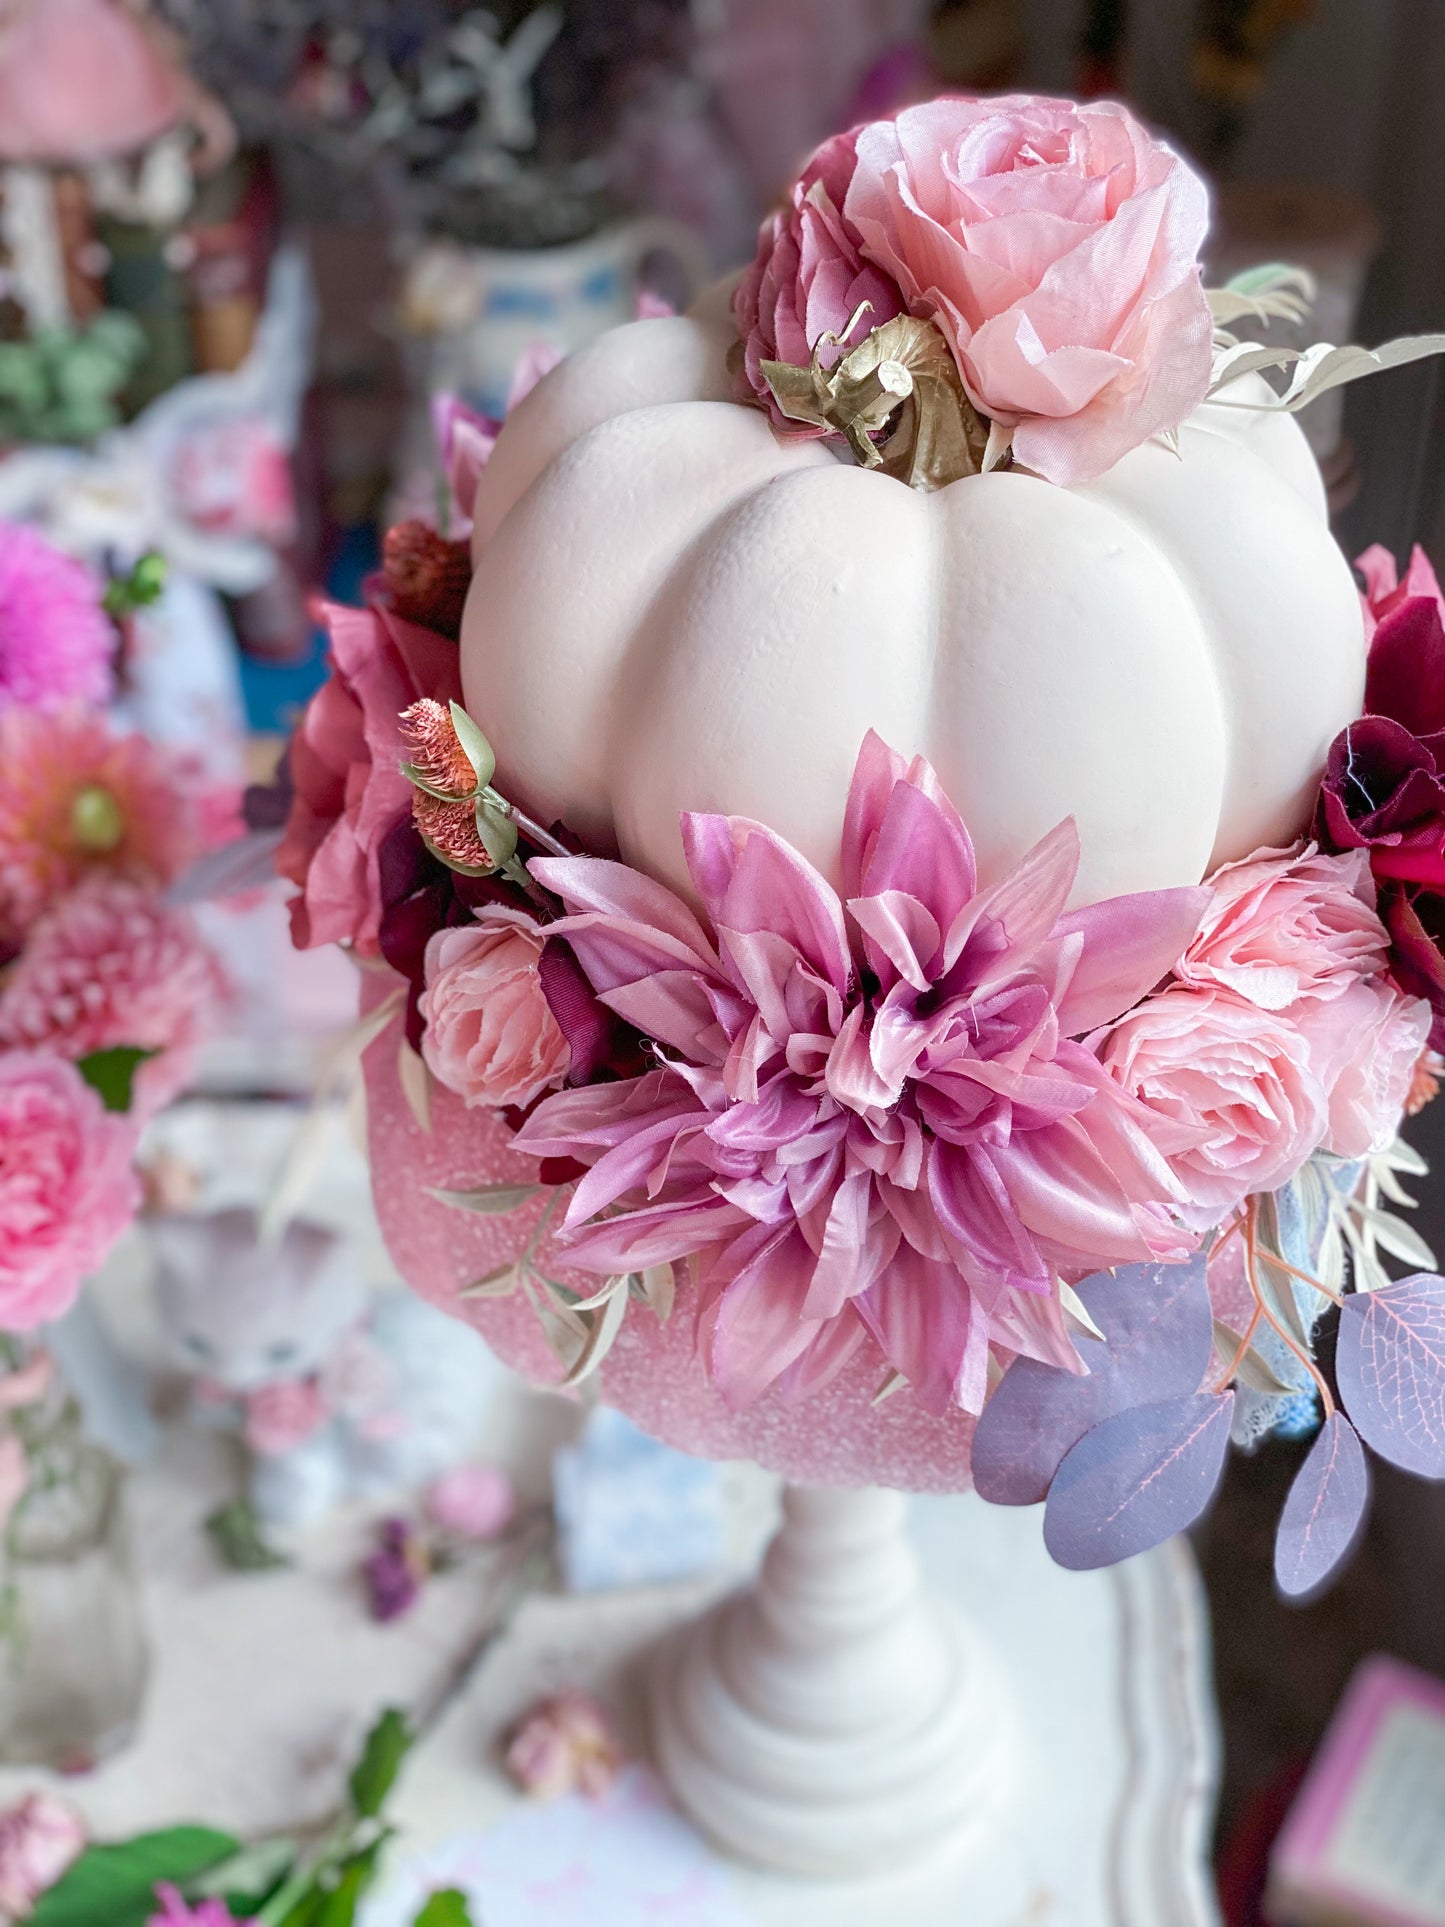 Bespoke Upcycled Cream and Pink Pumpkin Finial